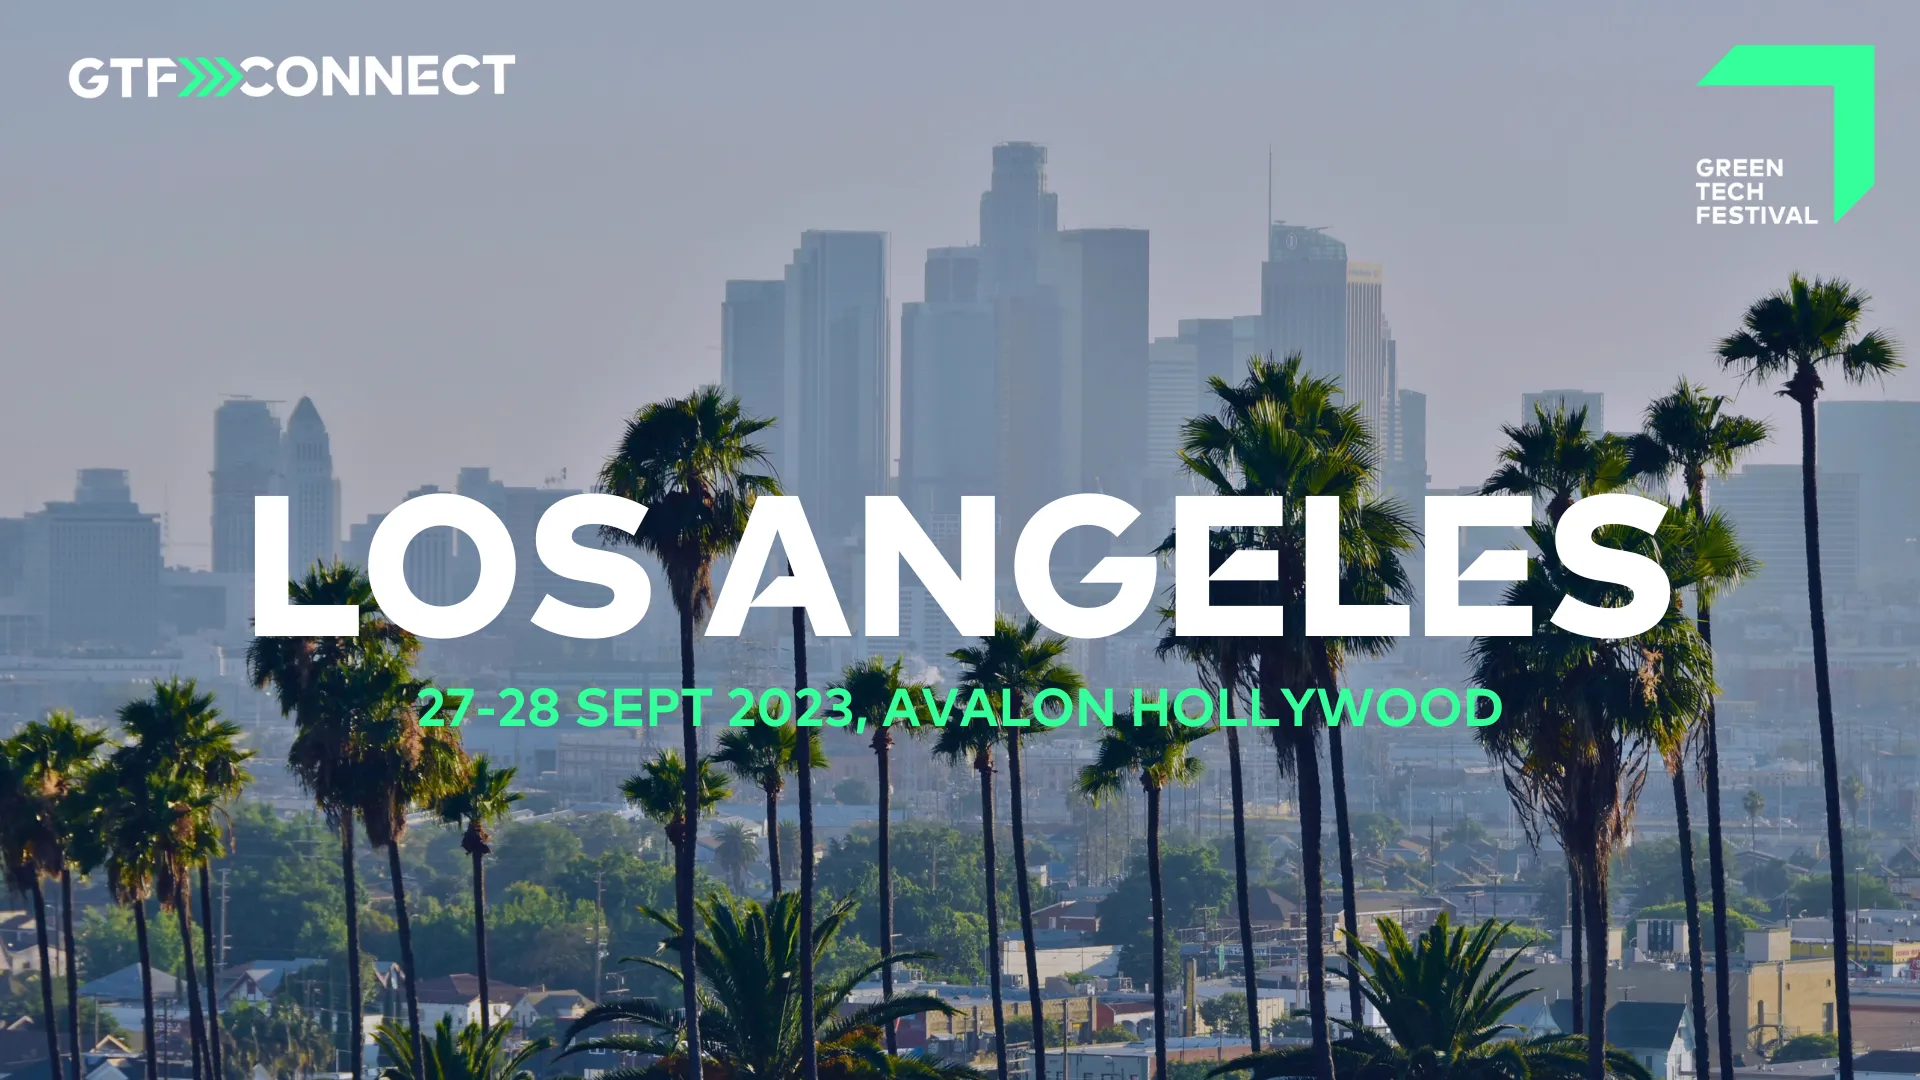 Our GTF CONNECT takes place at the Avalon Hollywood, 27-28 September 2023.